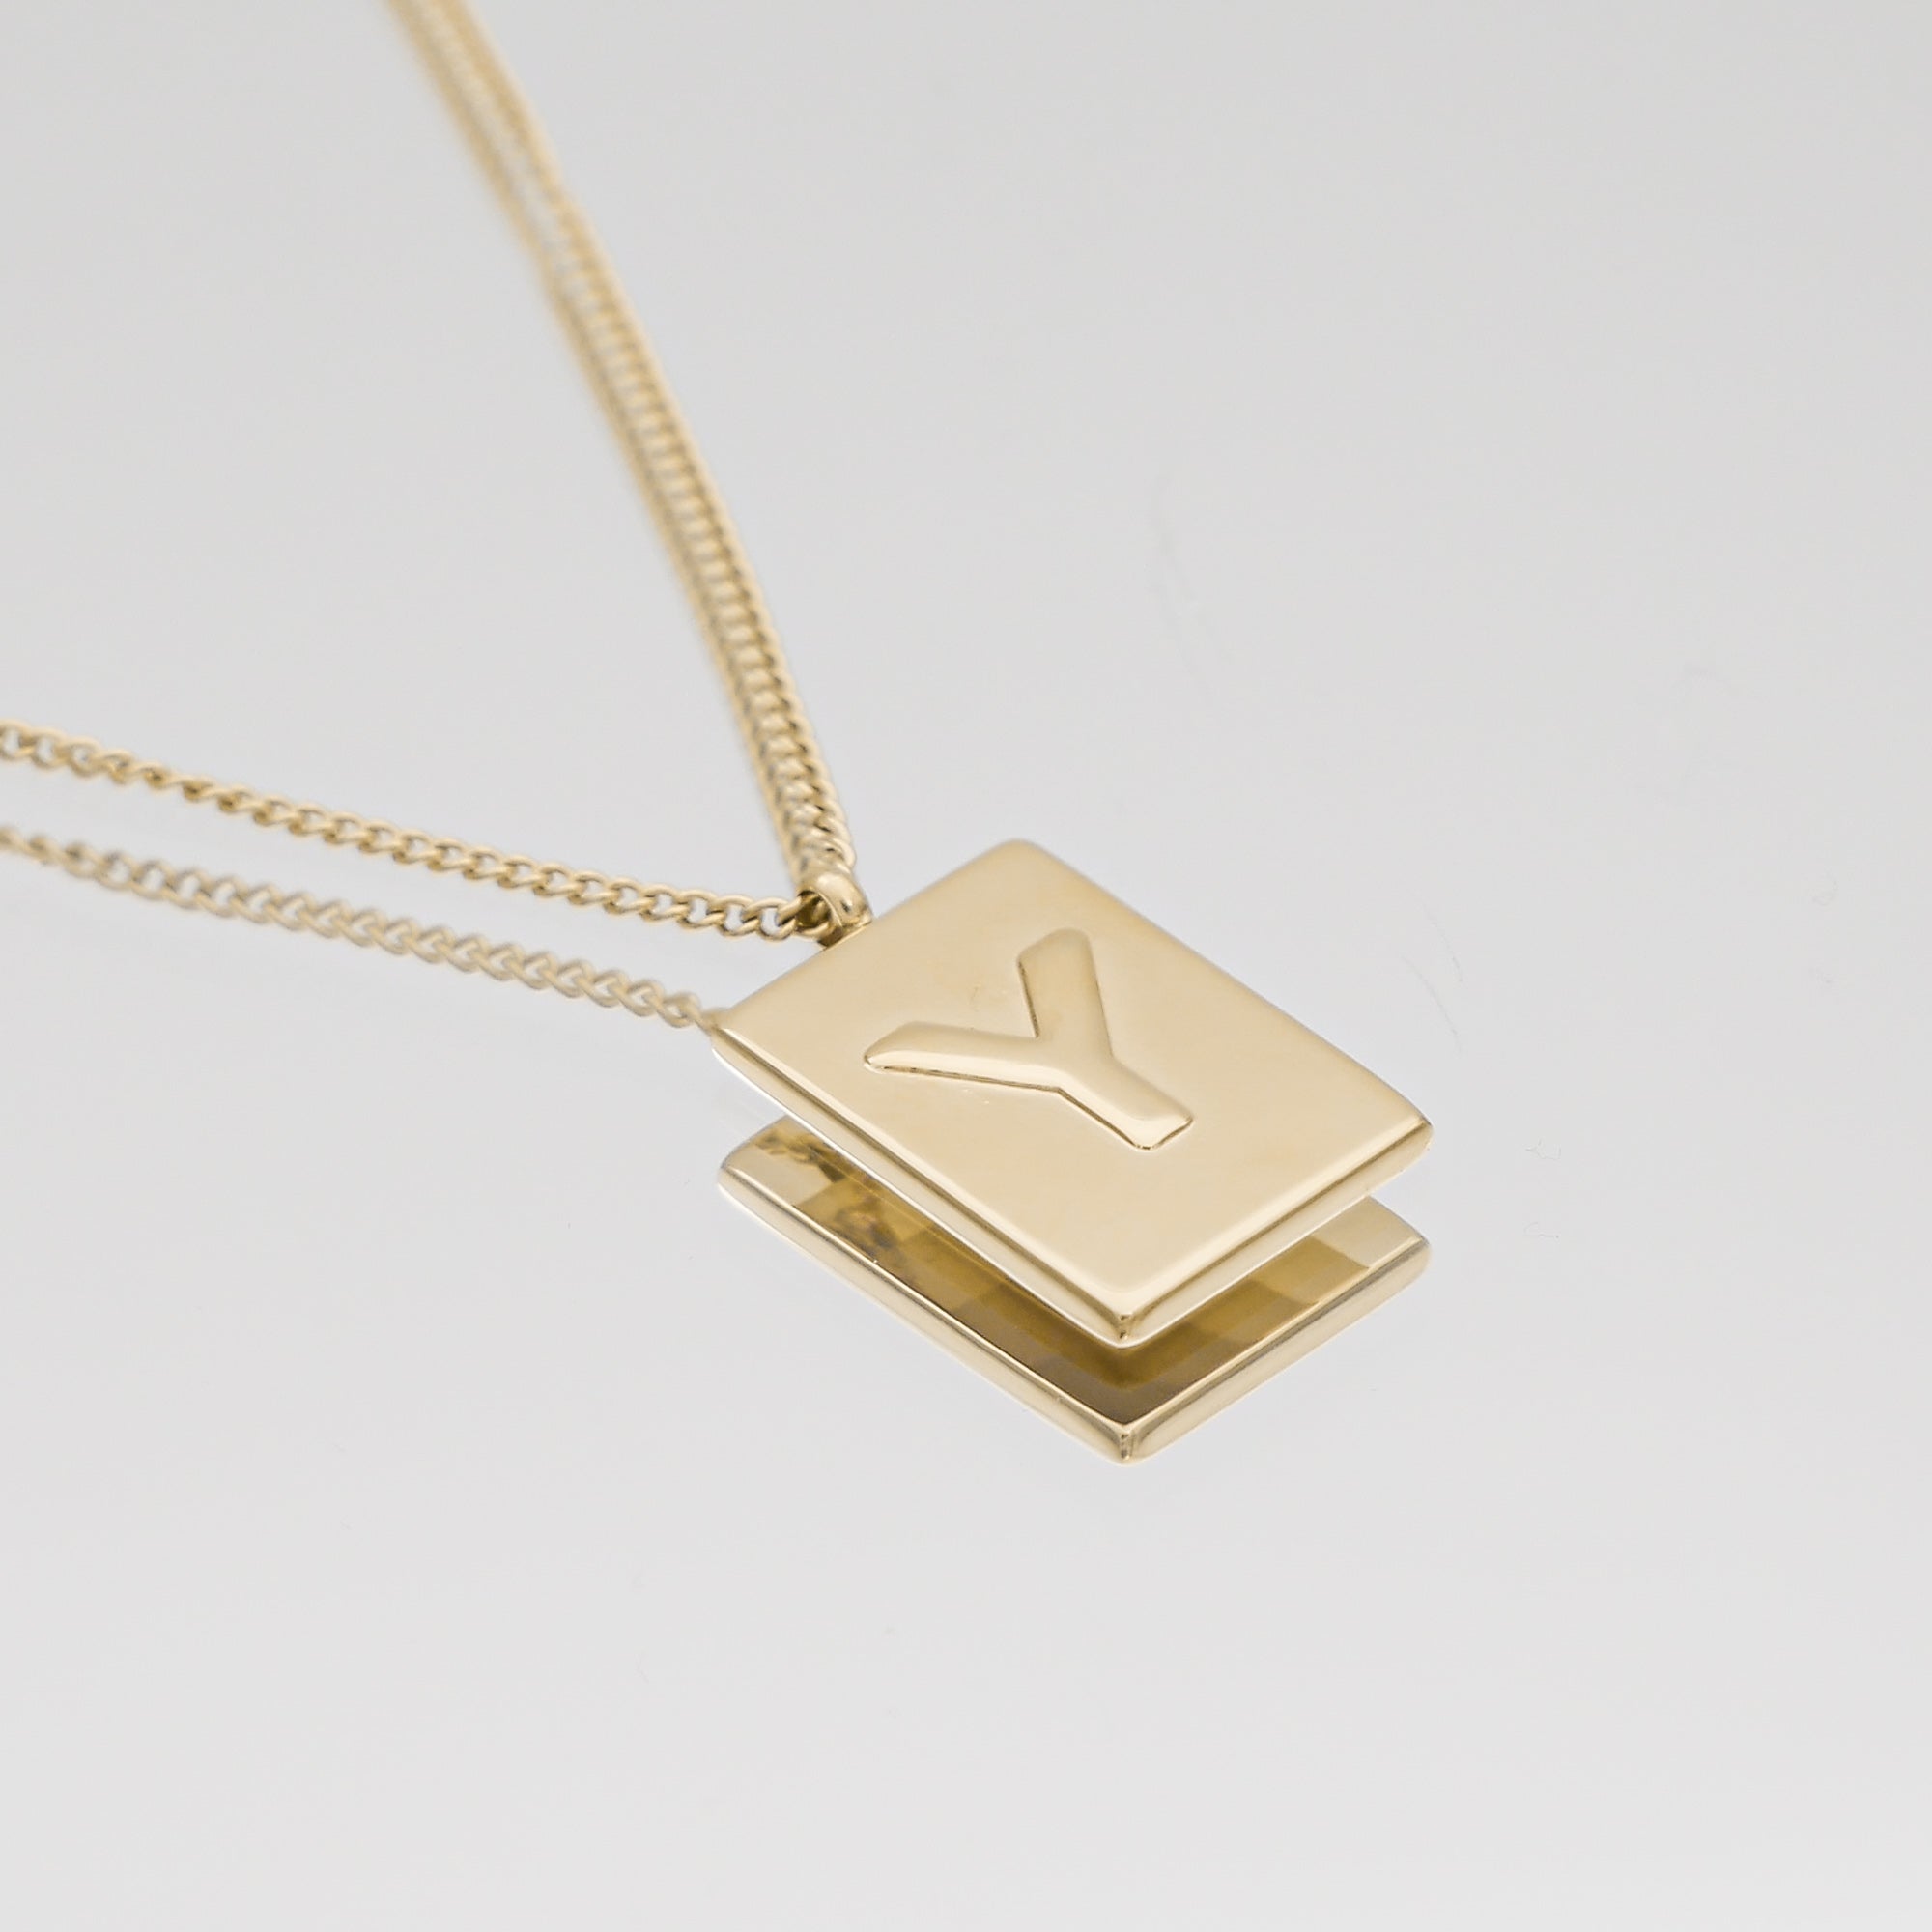 Athena custom initial Gold pendant Necklace, letter Y by PRYA